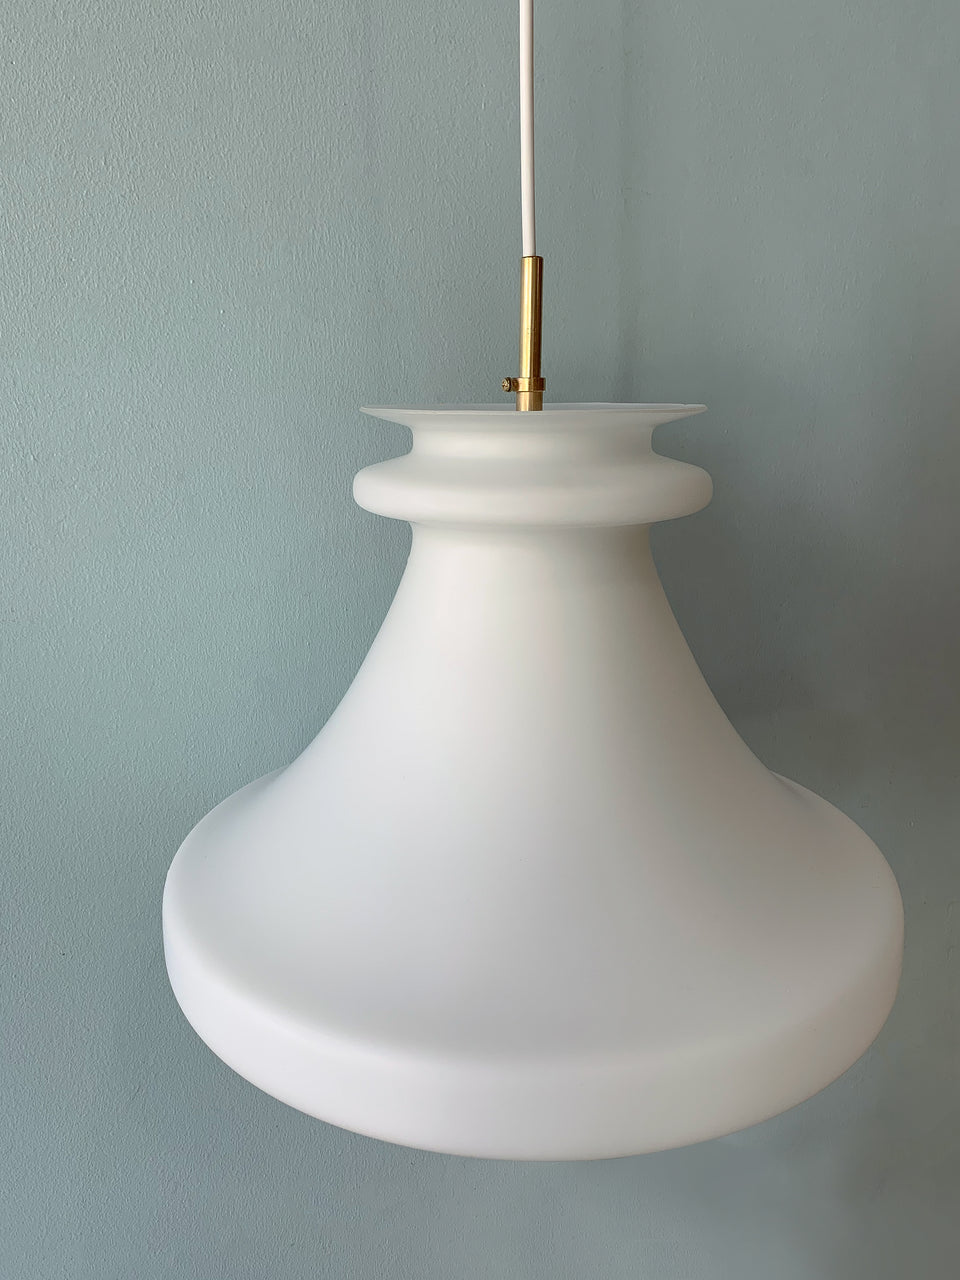 Frosted Glass Pendant Light Danish Vintage/デンマークヴィンテージ ペンダントライト フロストガラス 北欧インテリア